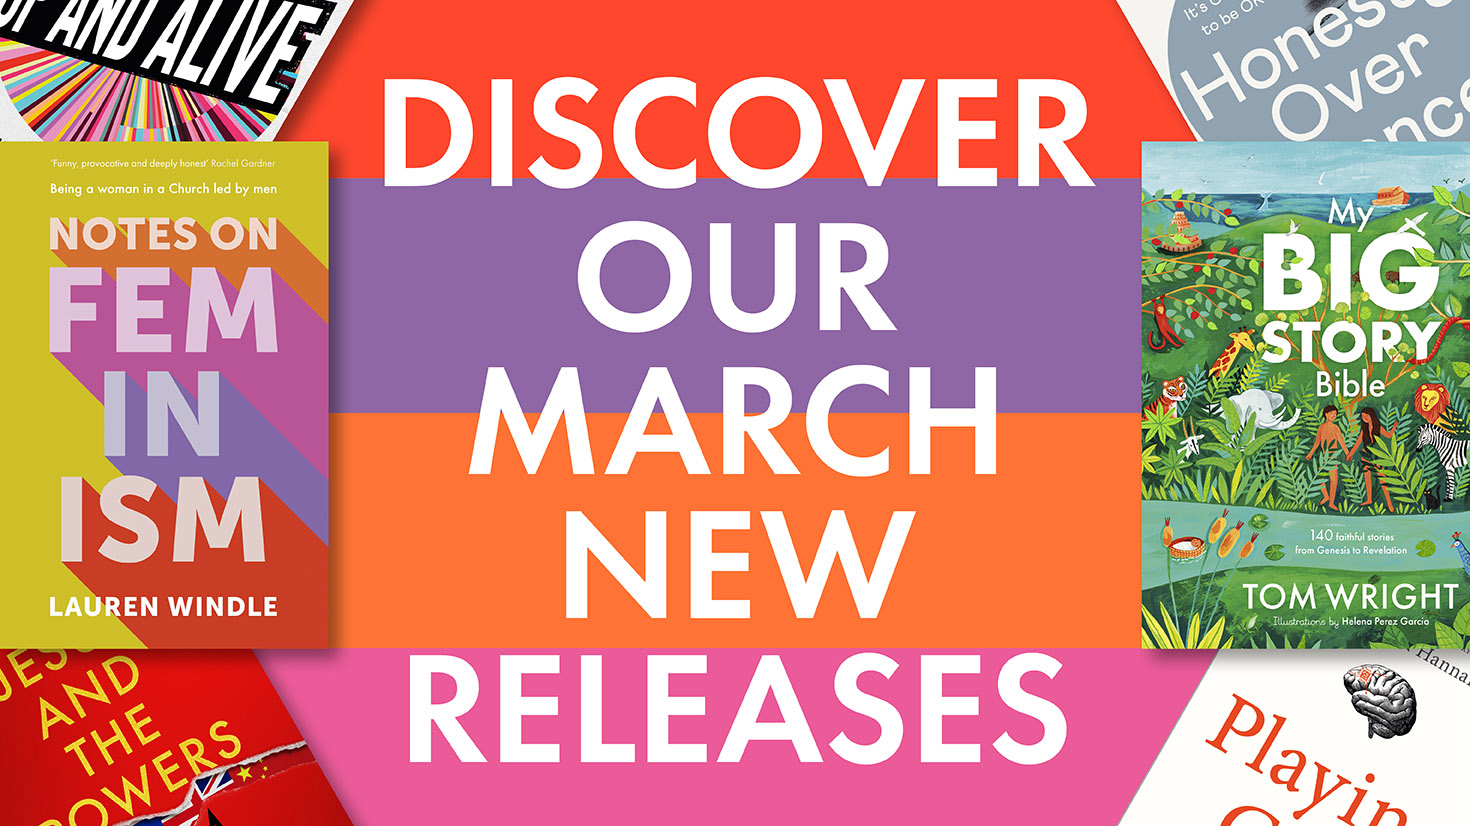 Discover our March New Releases